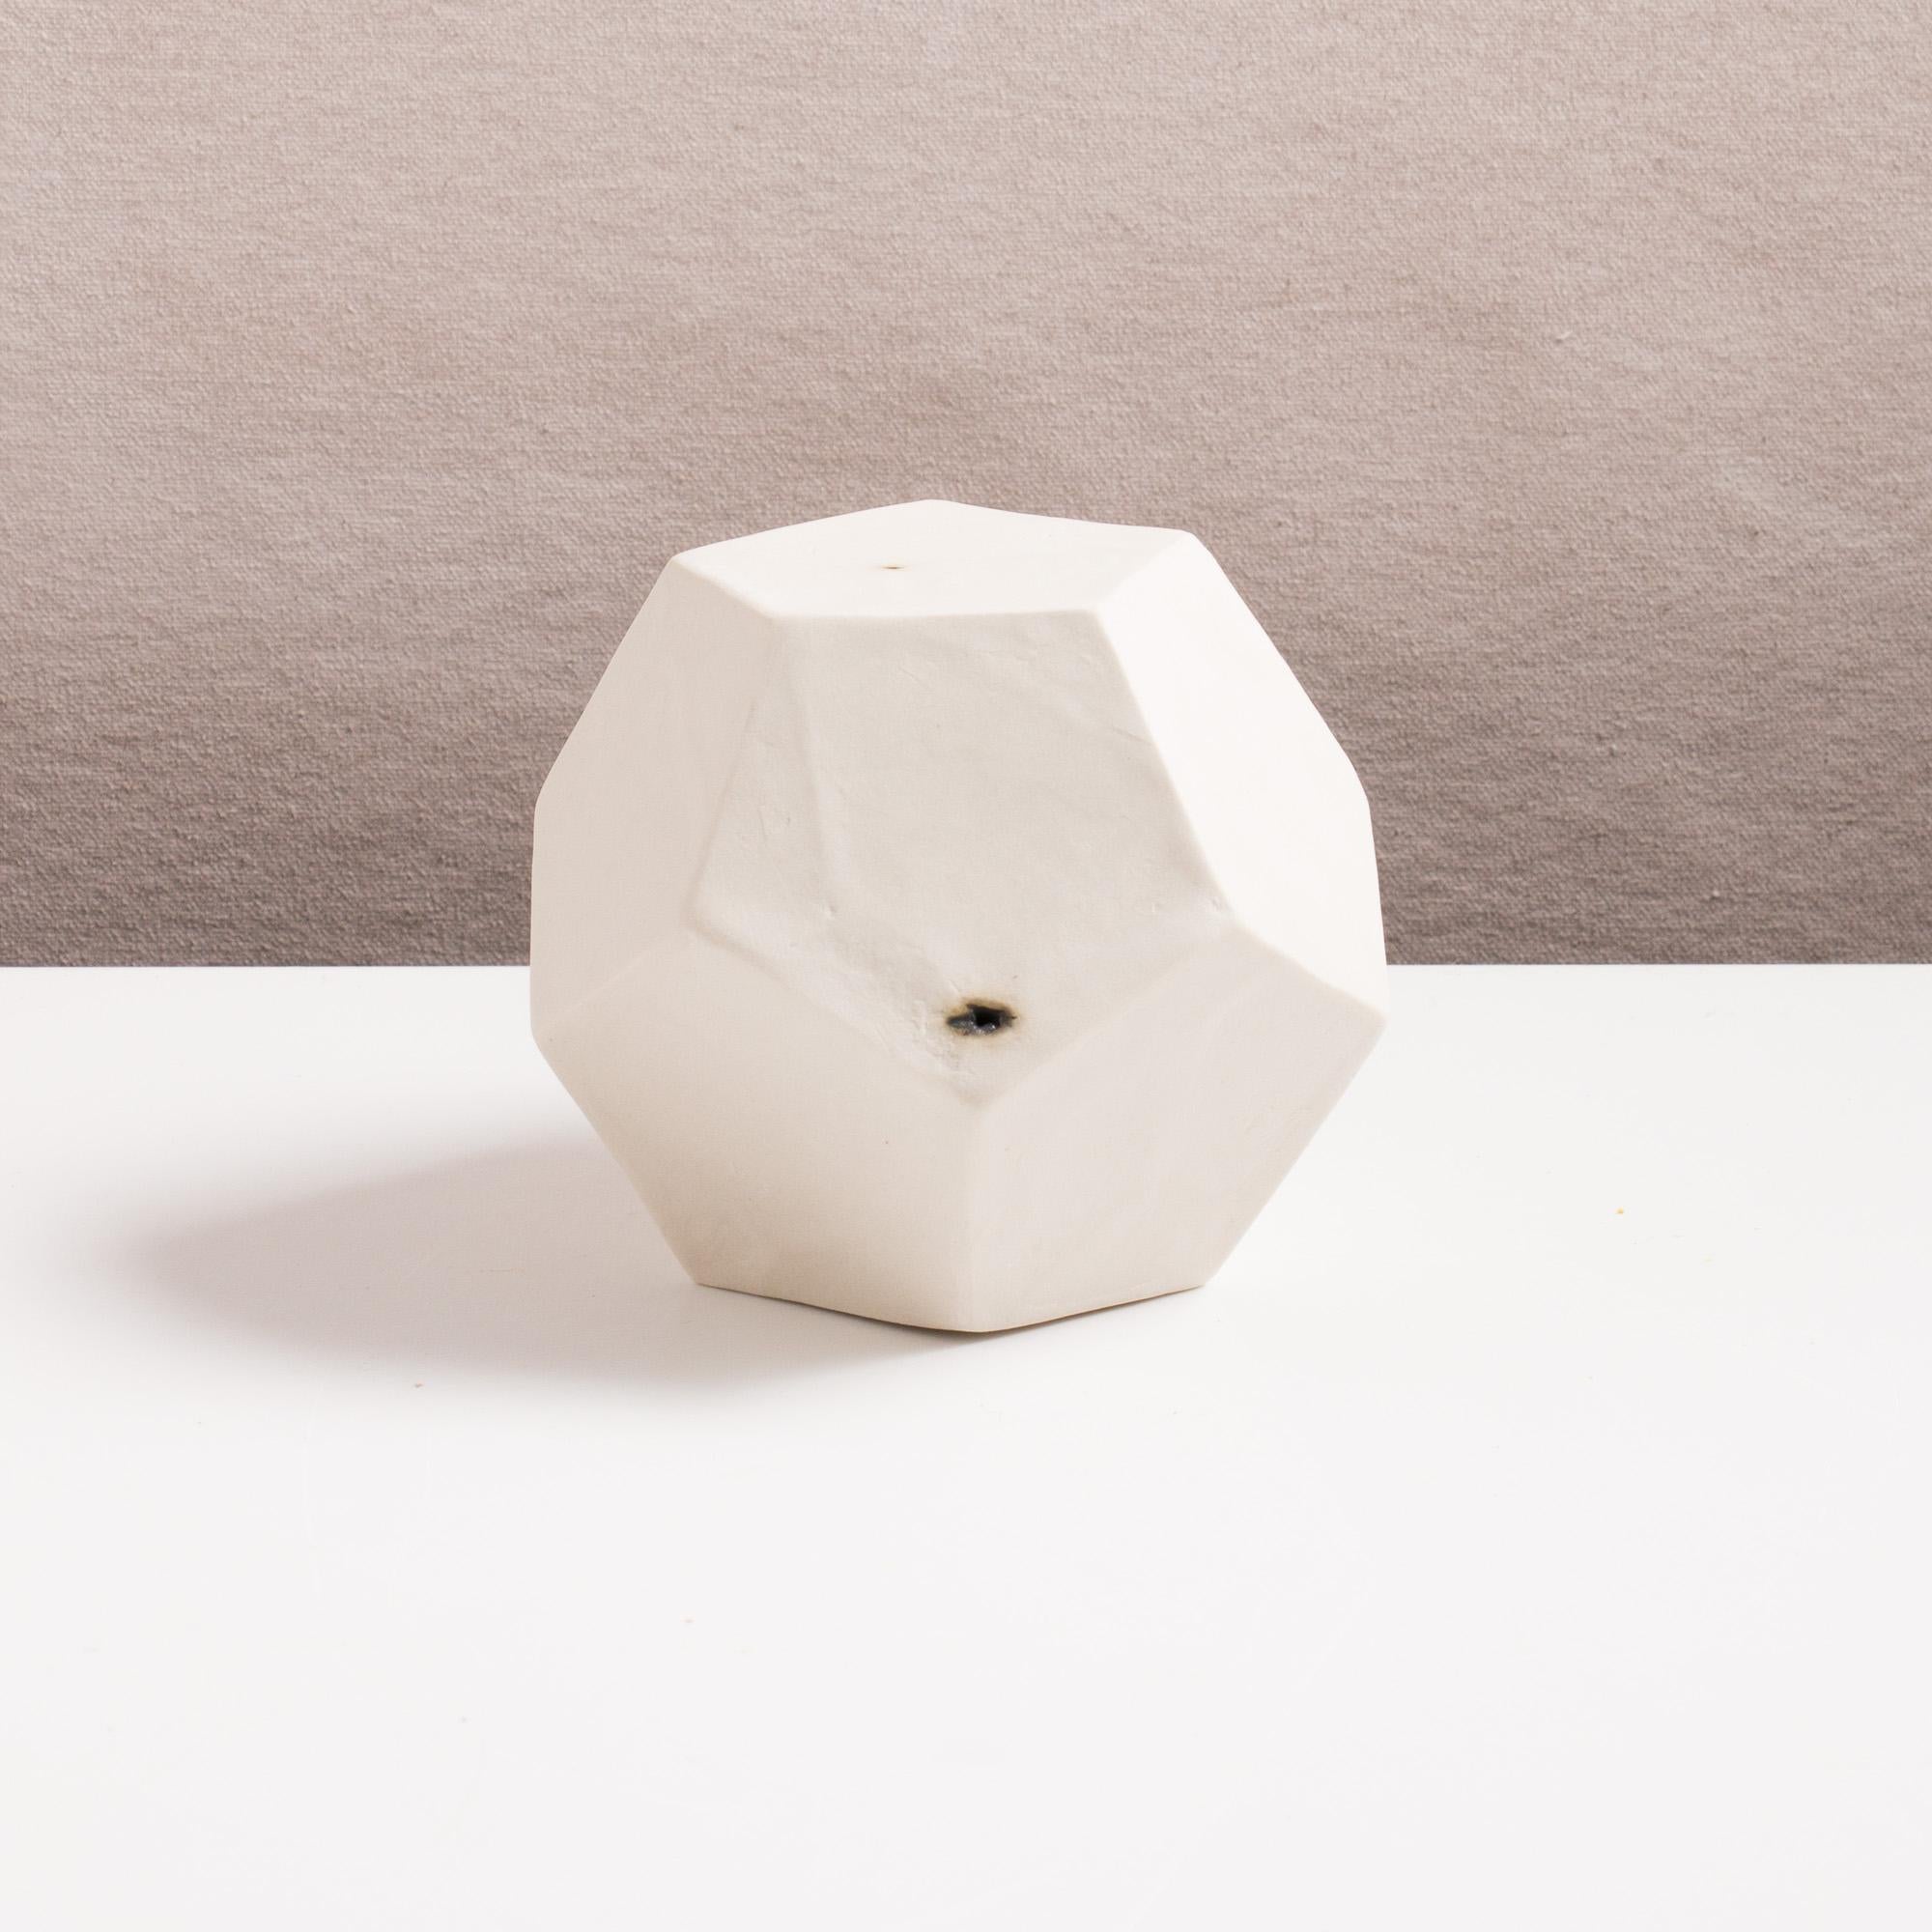 American Relic Dodecahedron, Geometric White Porcelain Ceramic Small Sculptural Object For Sale